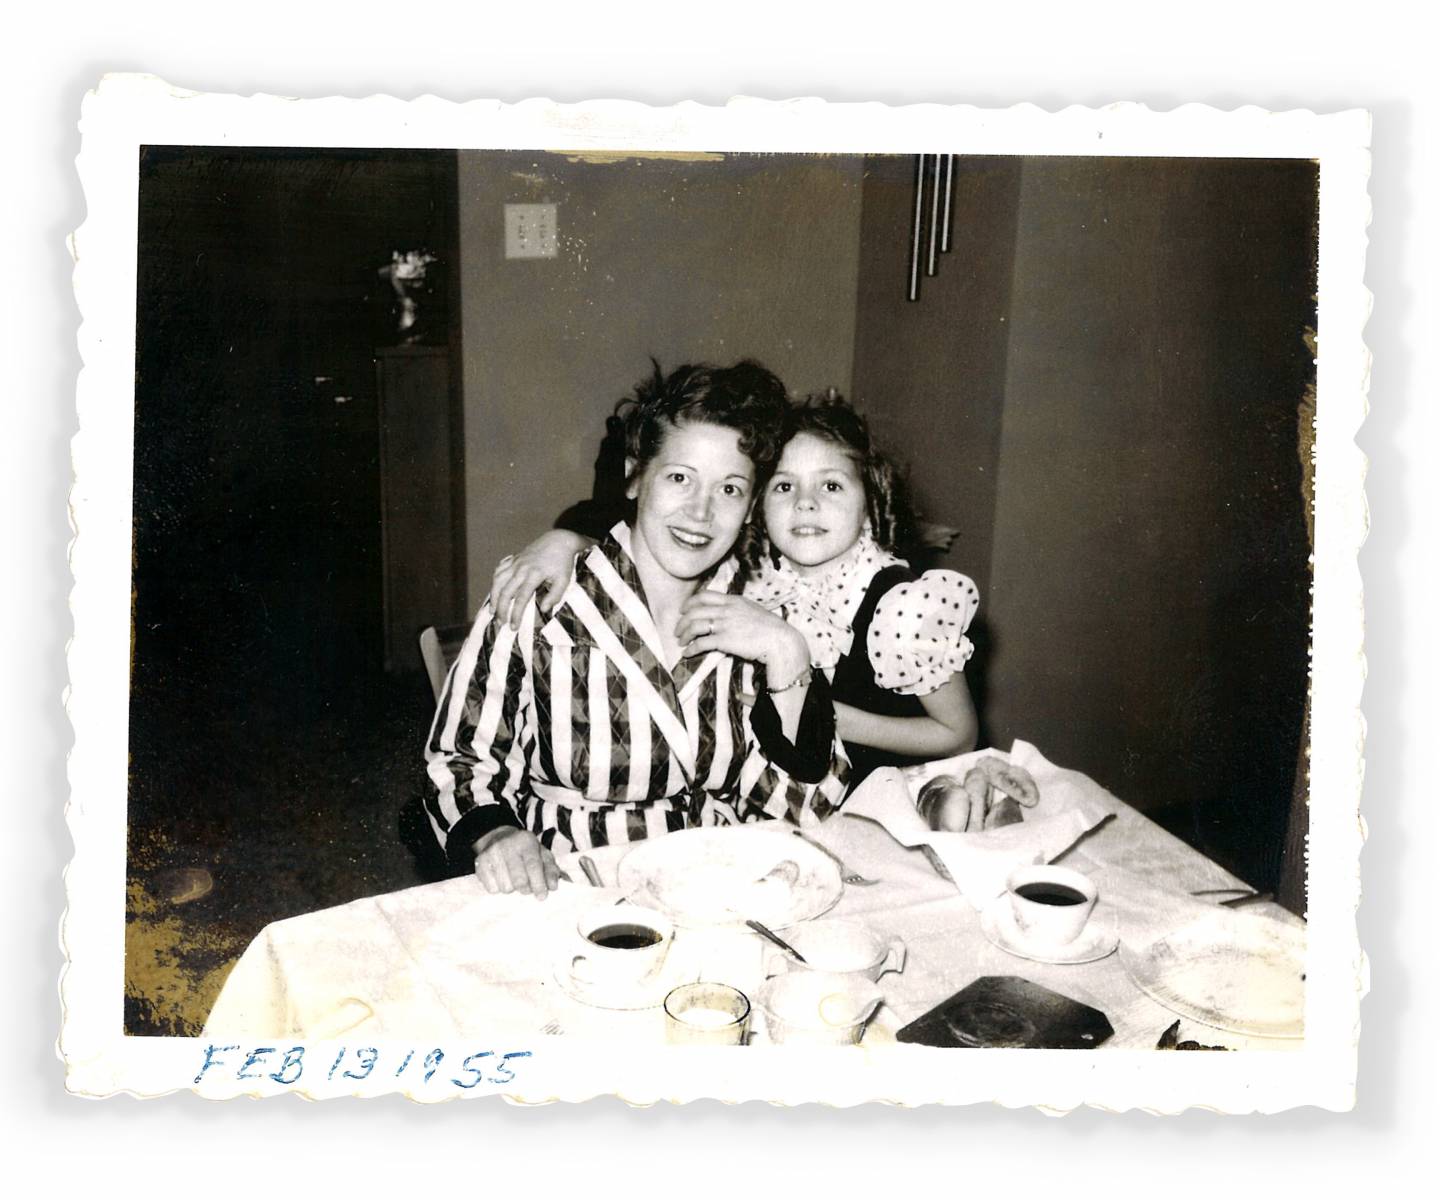 Sandie Bermann, as a child, with her mother